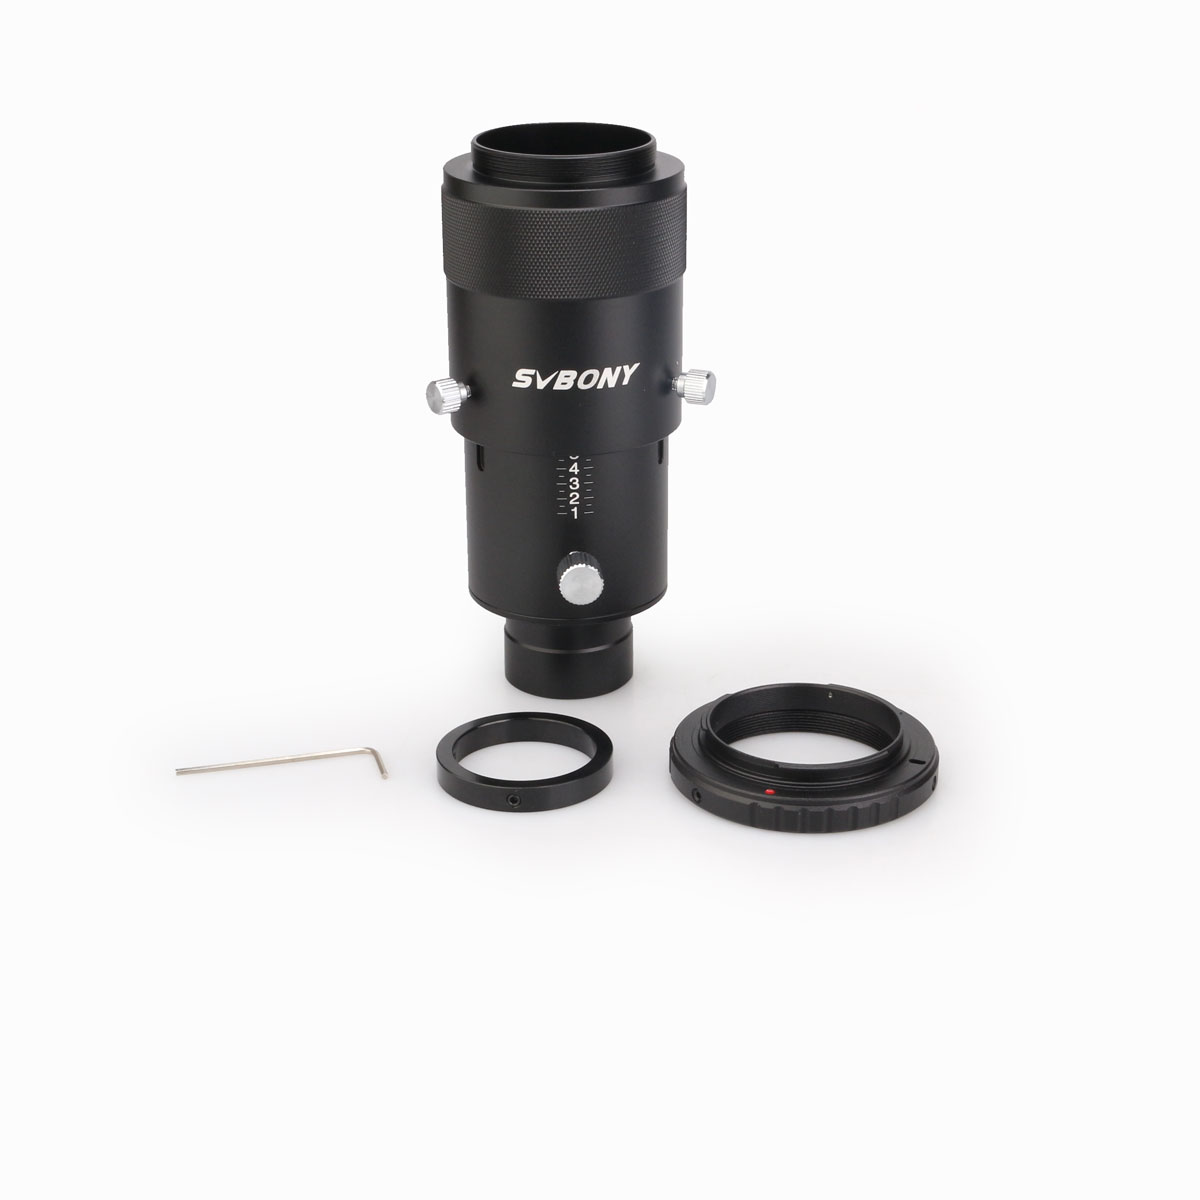 SVBONY-SV112-125quot-Fully-Metal-Deluxe-Variable-Eyepiece-Projection-Kit-for-Telescopes-with-T-Ring--1842642-4